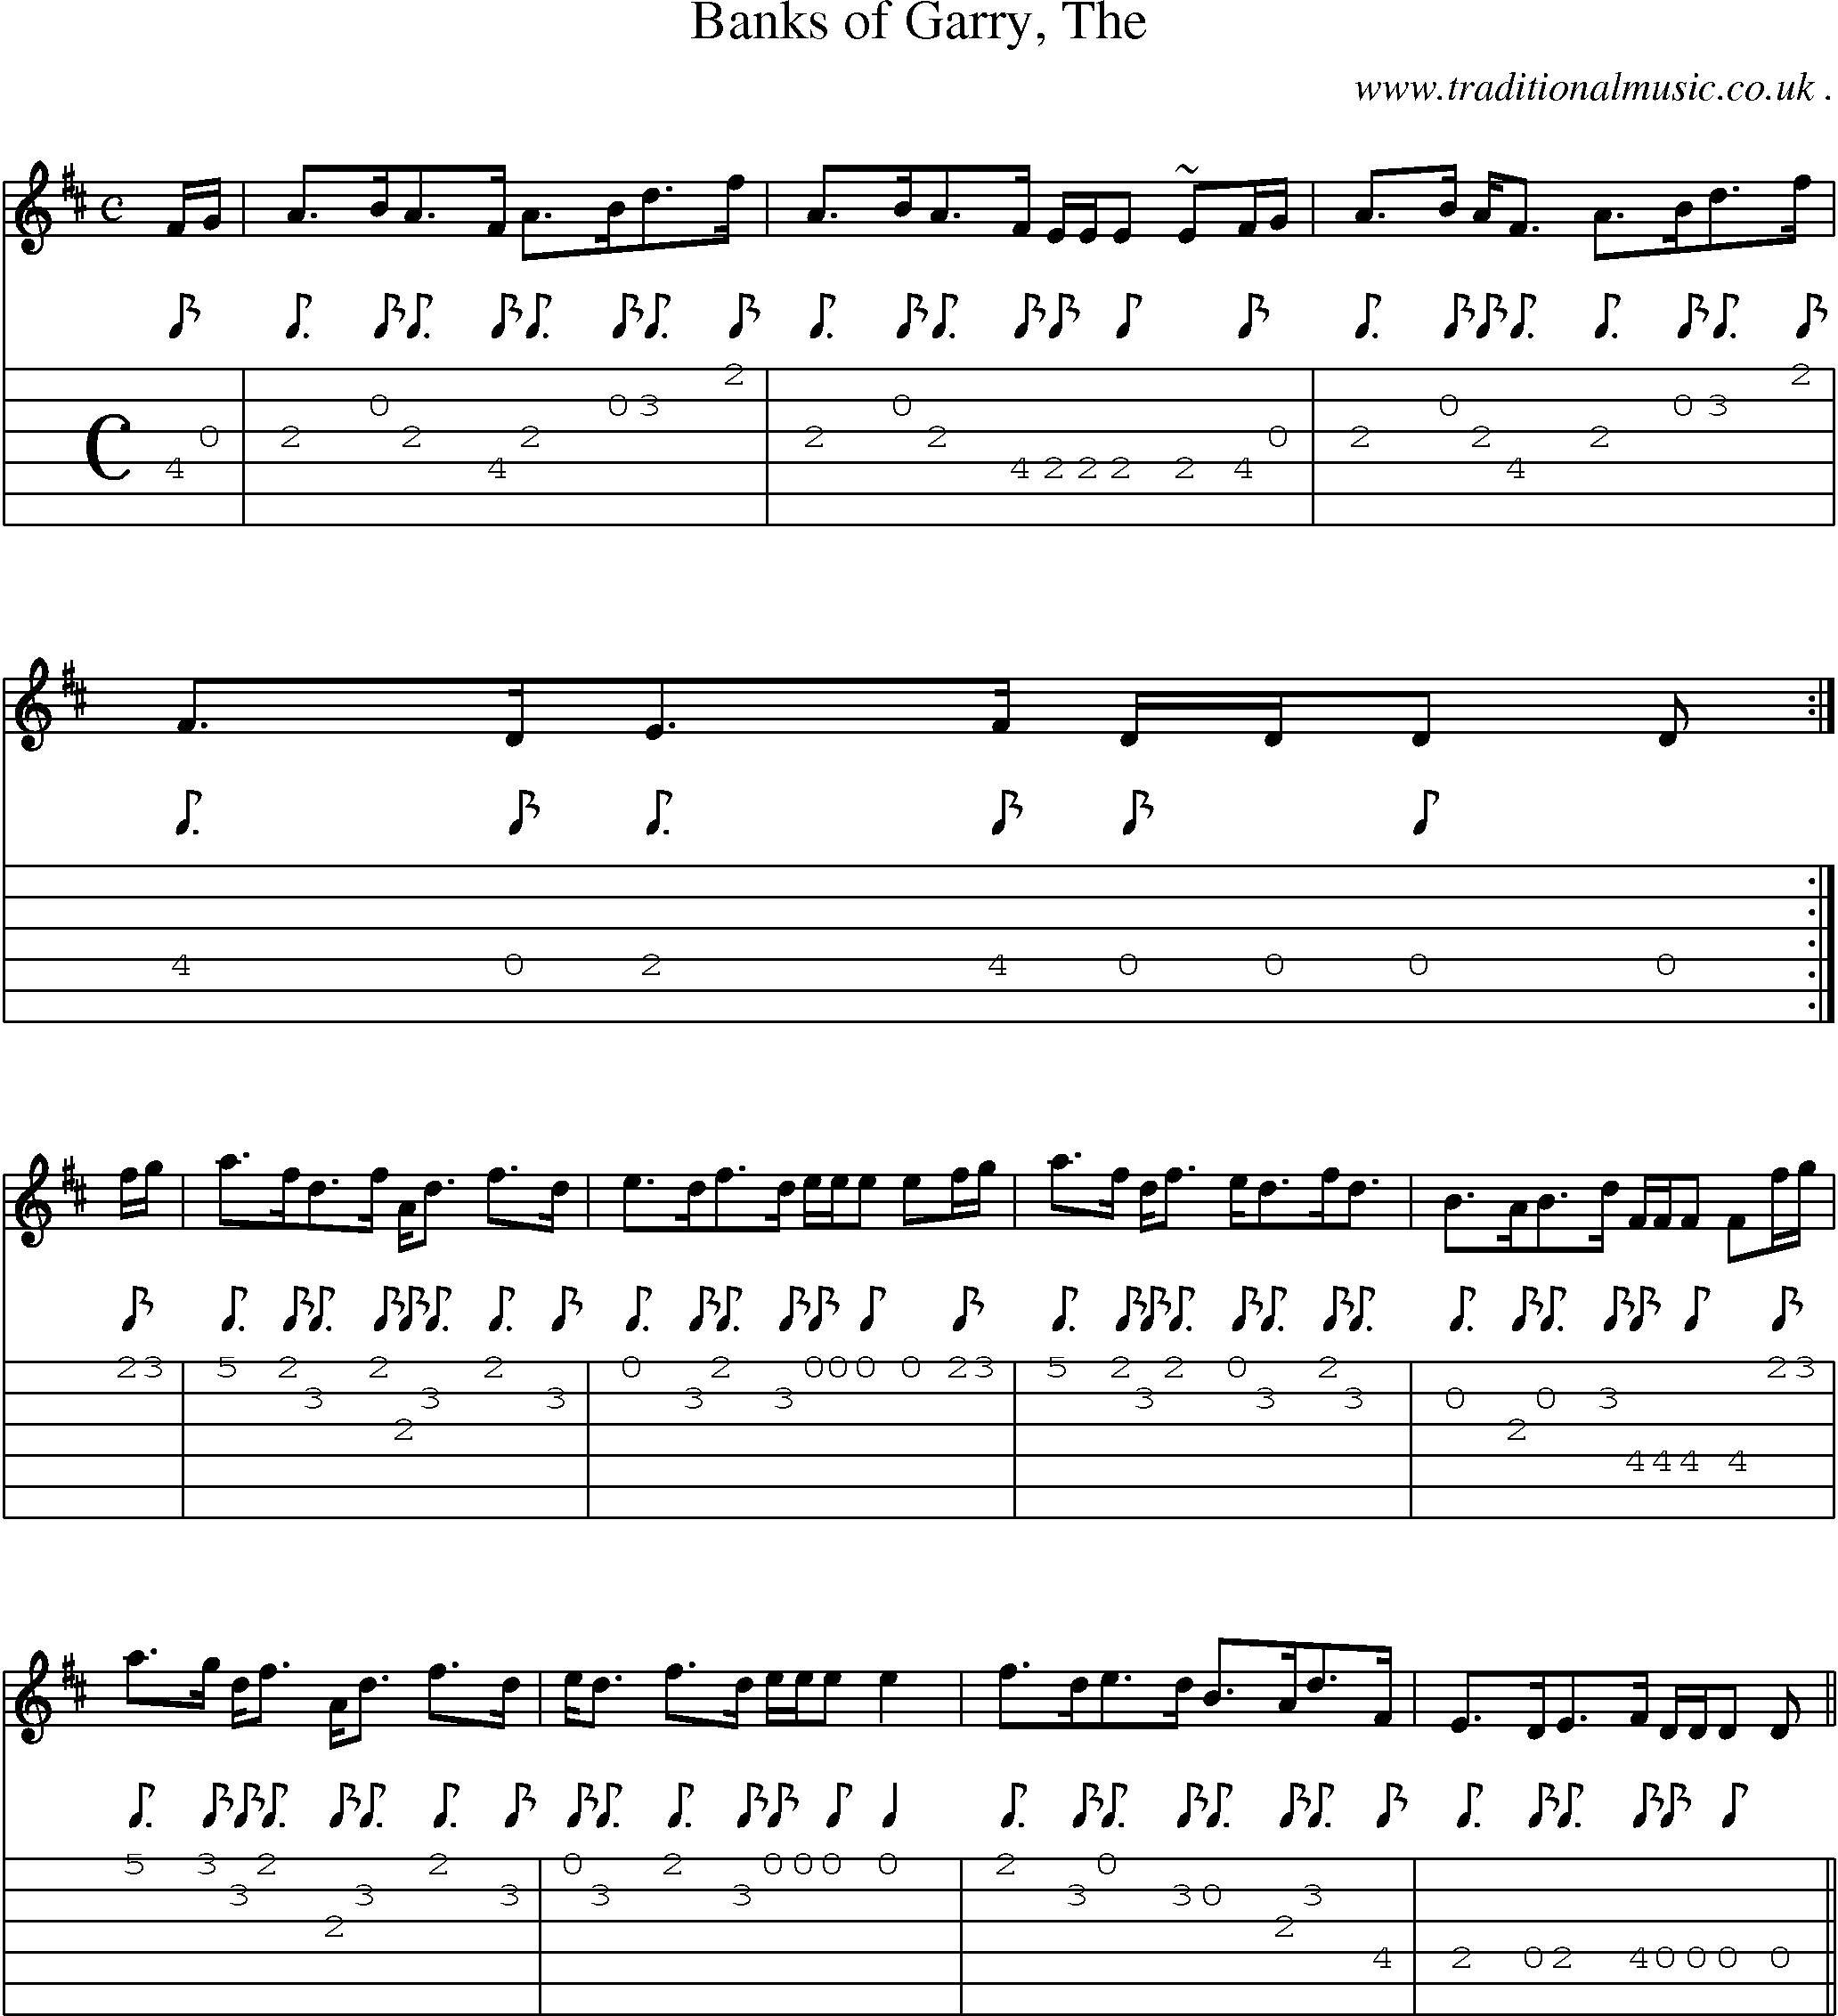 Sheet-music  score, Chords and Guitar Tabs for Banks Of Garry The